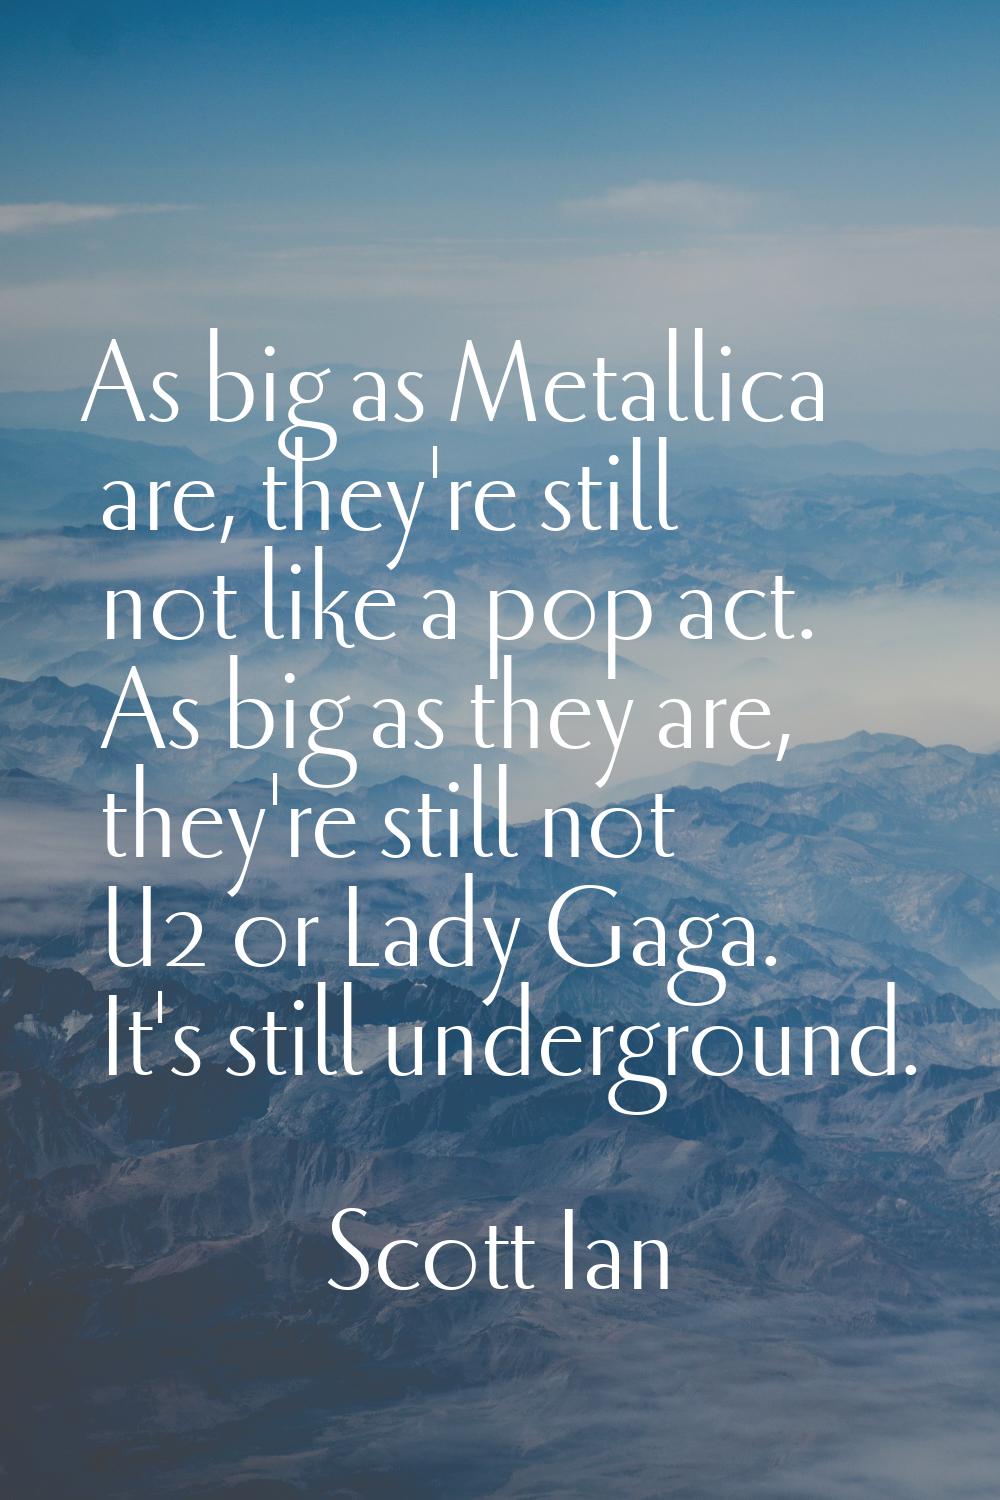 As big as Metallica are, they're still not like a pop act. As big as they are, they're still not U2